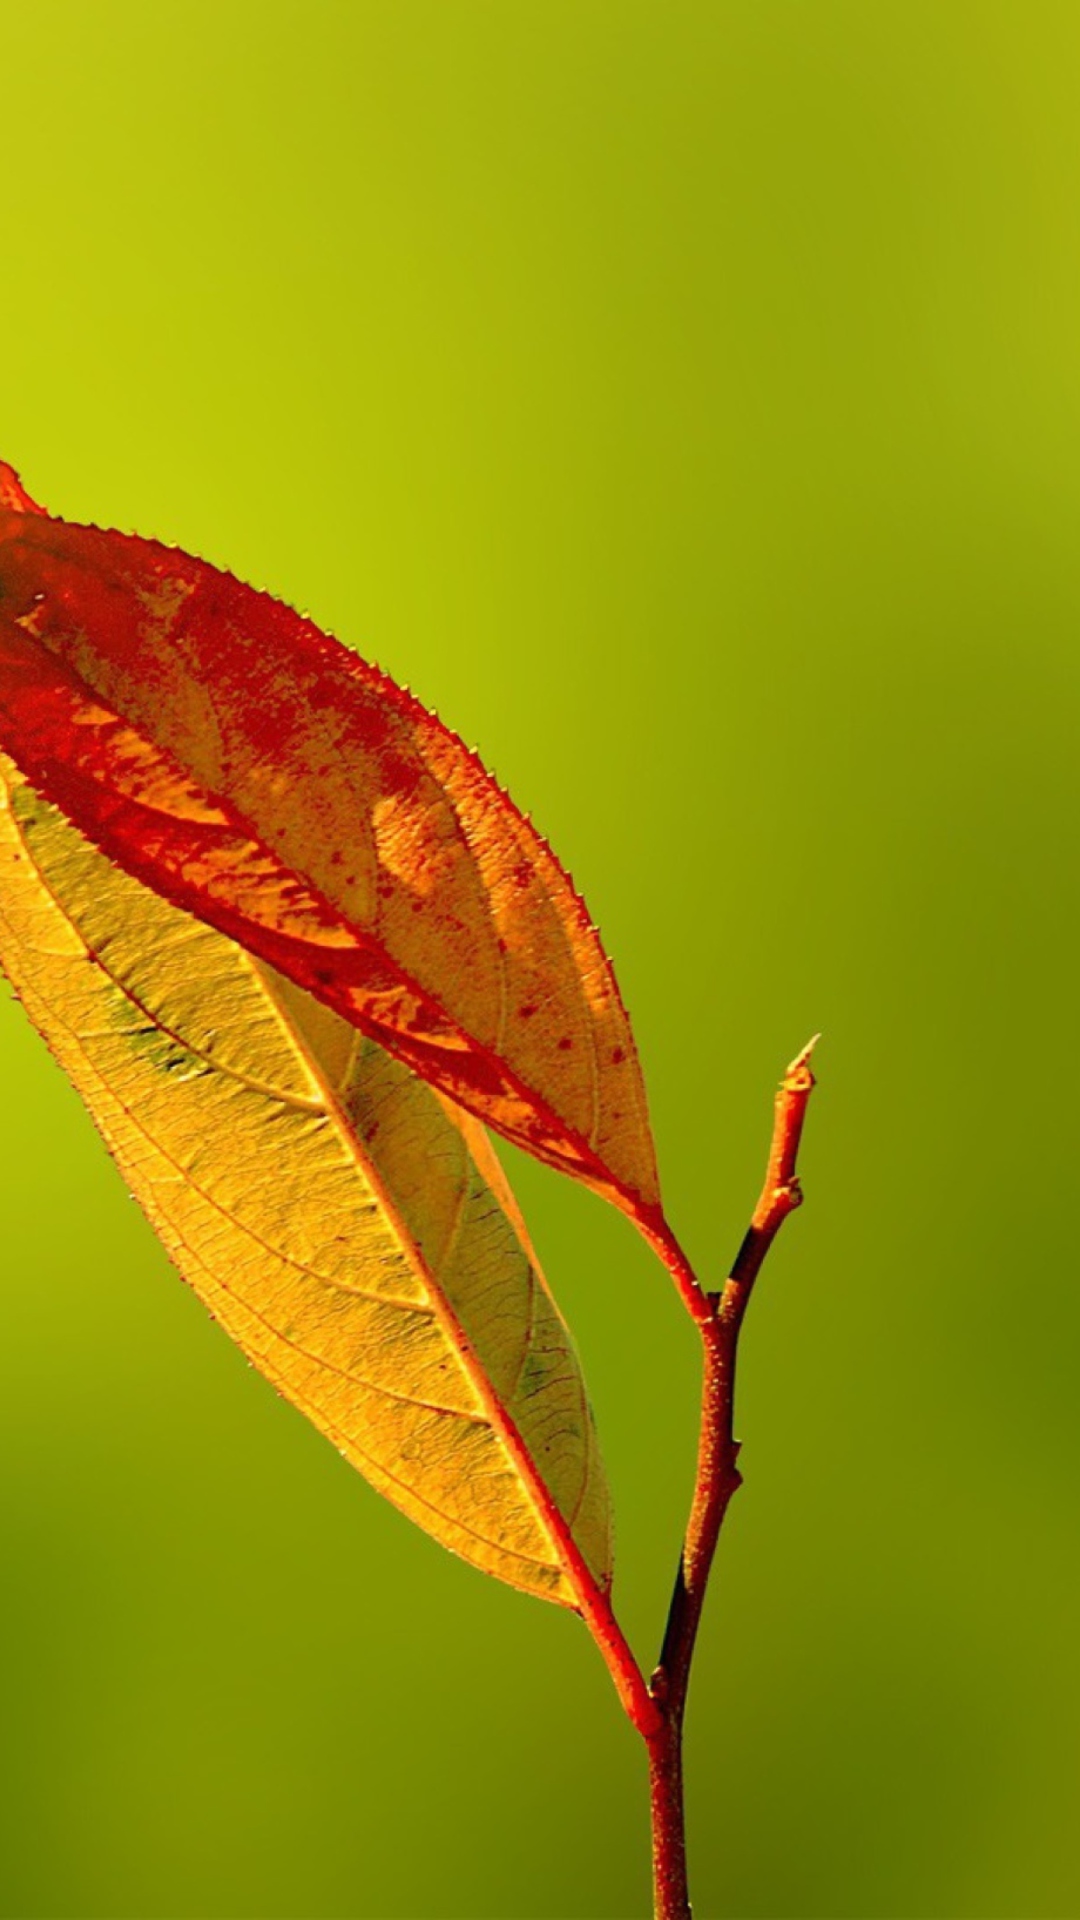 Das Red And Yellow Leaves On Green Wallpaper 1080x1920